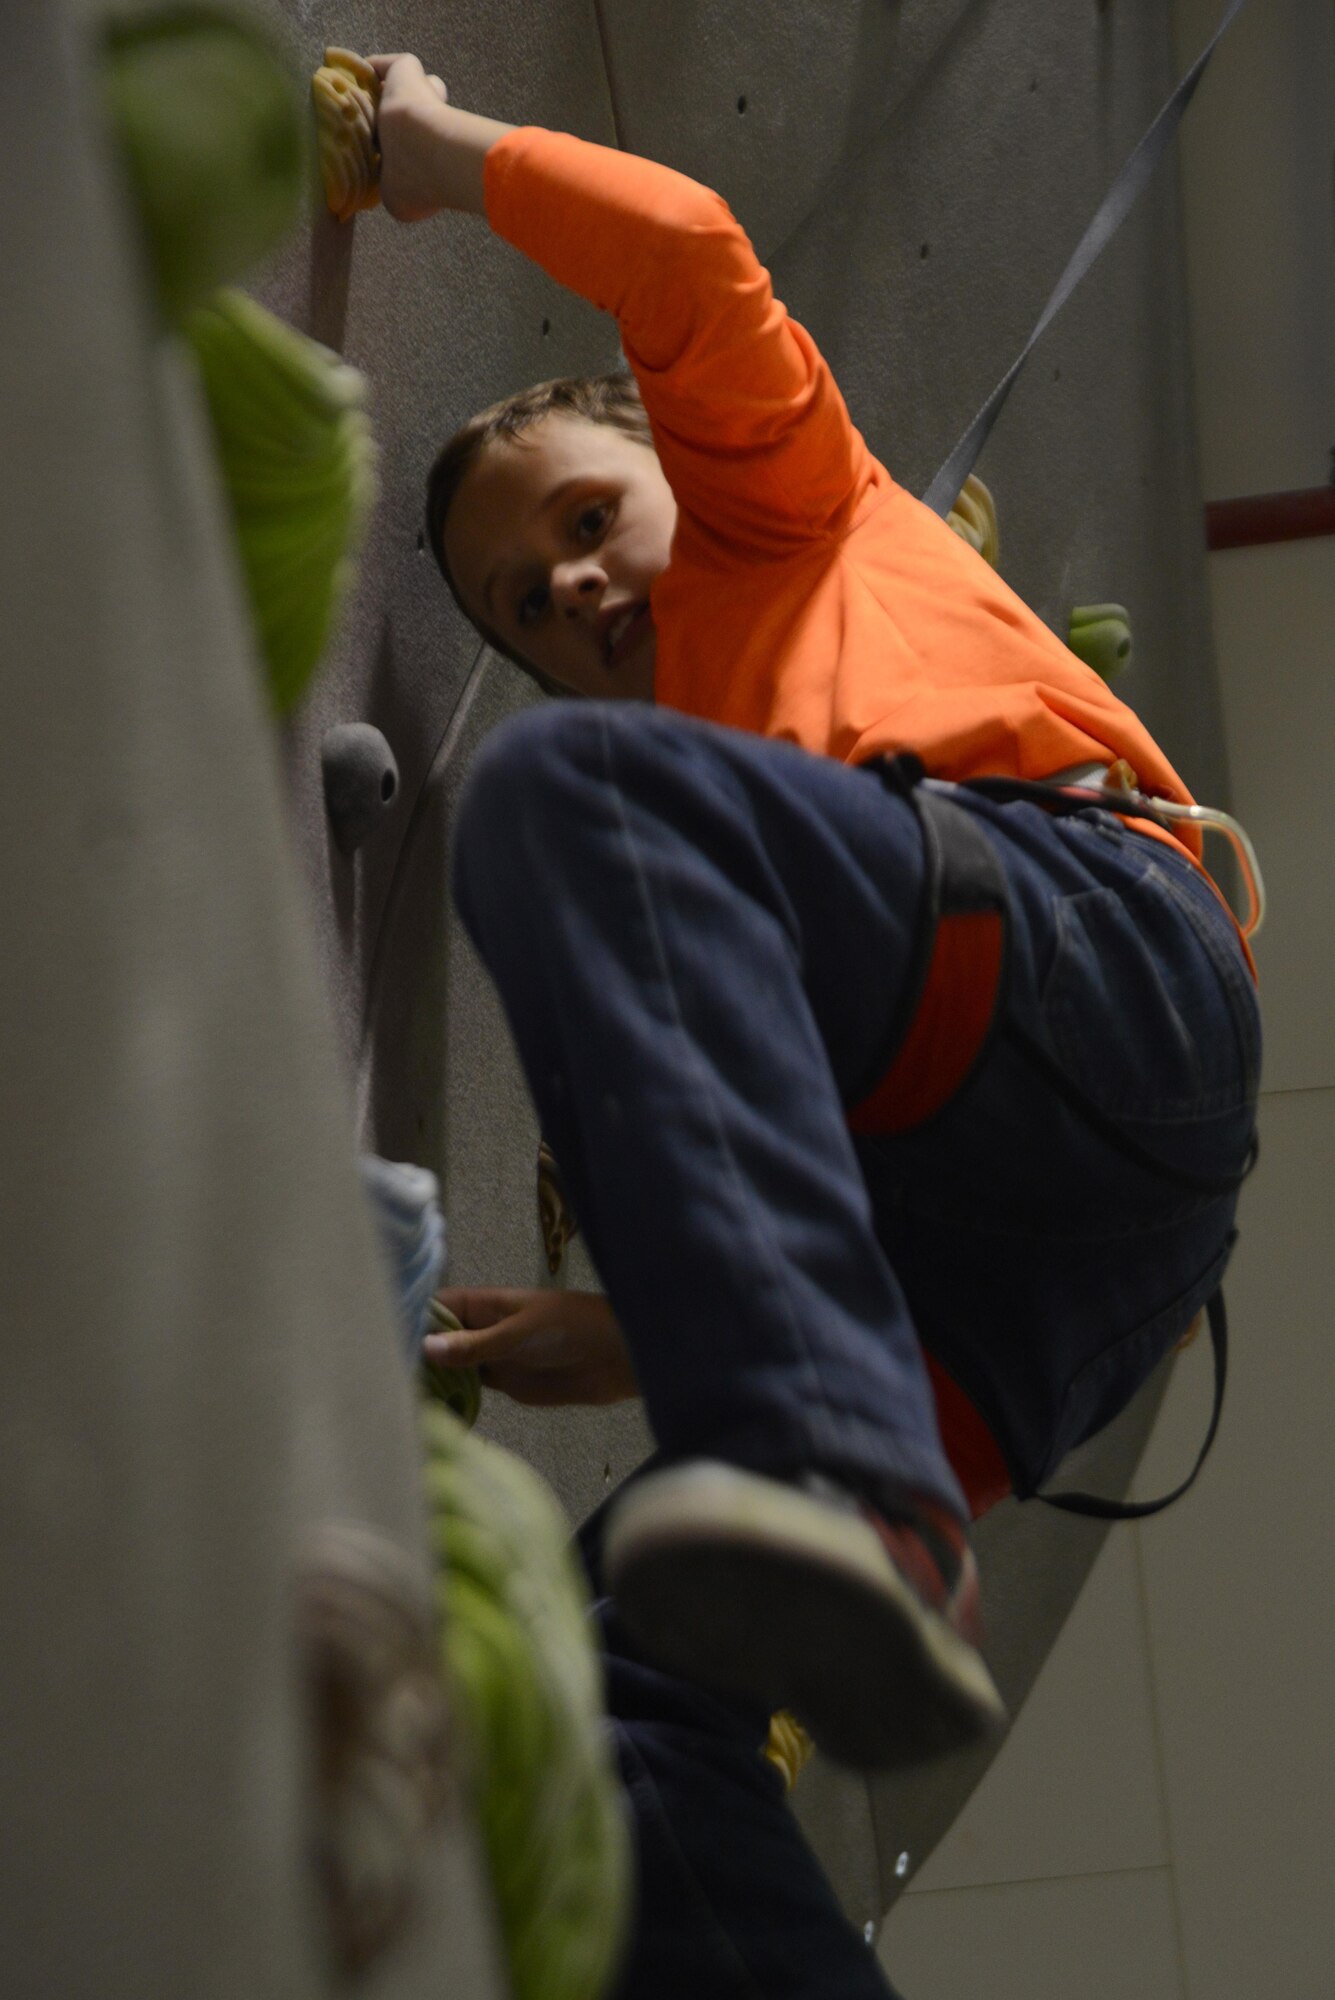 Lucas, 10, son of Tech. Sgt. Stacey Varner with the 673d Aerospace Medical Squadron, climbs an indoor rock wall during the Worldwide Day of Play at the Kennecott Youth Center at Joint Base Elmendorf-Richardson, Alaska, Sept. 21, 2016. The Worldwide Day of Play is an annual event that encourages kids and parents to go outside and play instead of sitting indoors and watching television. Due to inclement weather, the Kennecott Youth Center provided several games and stations like the cupcake walk, indoor rock climbing, batting cage, pitching mound and more.